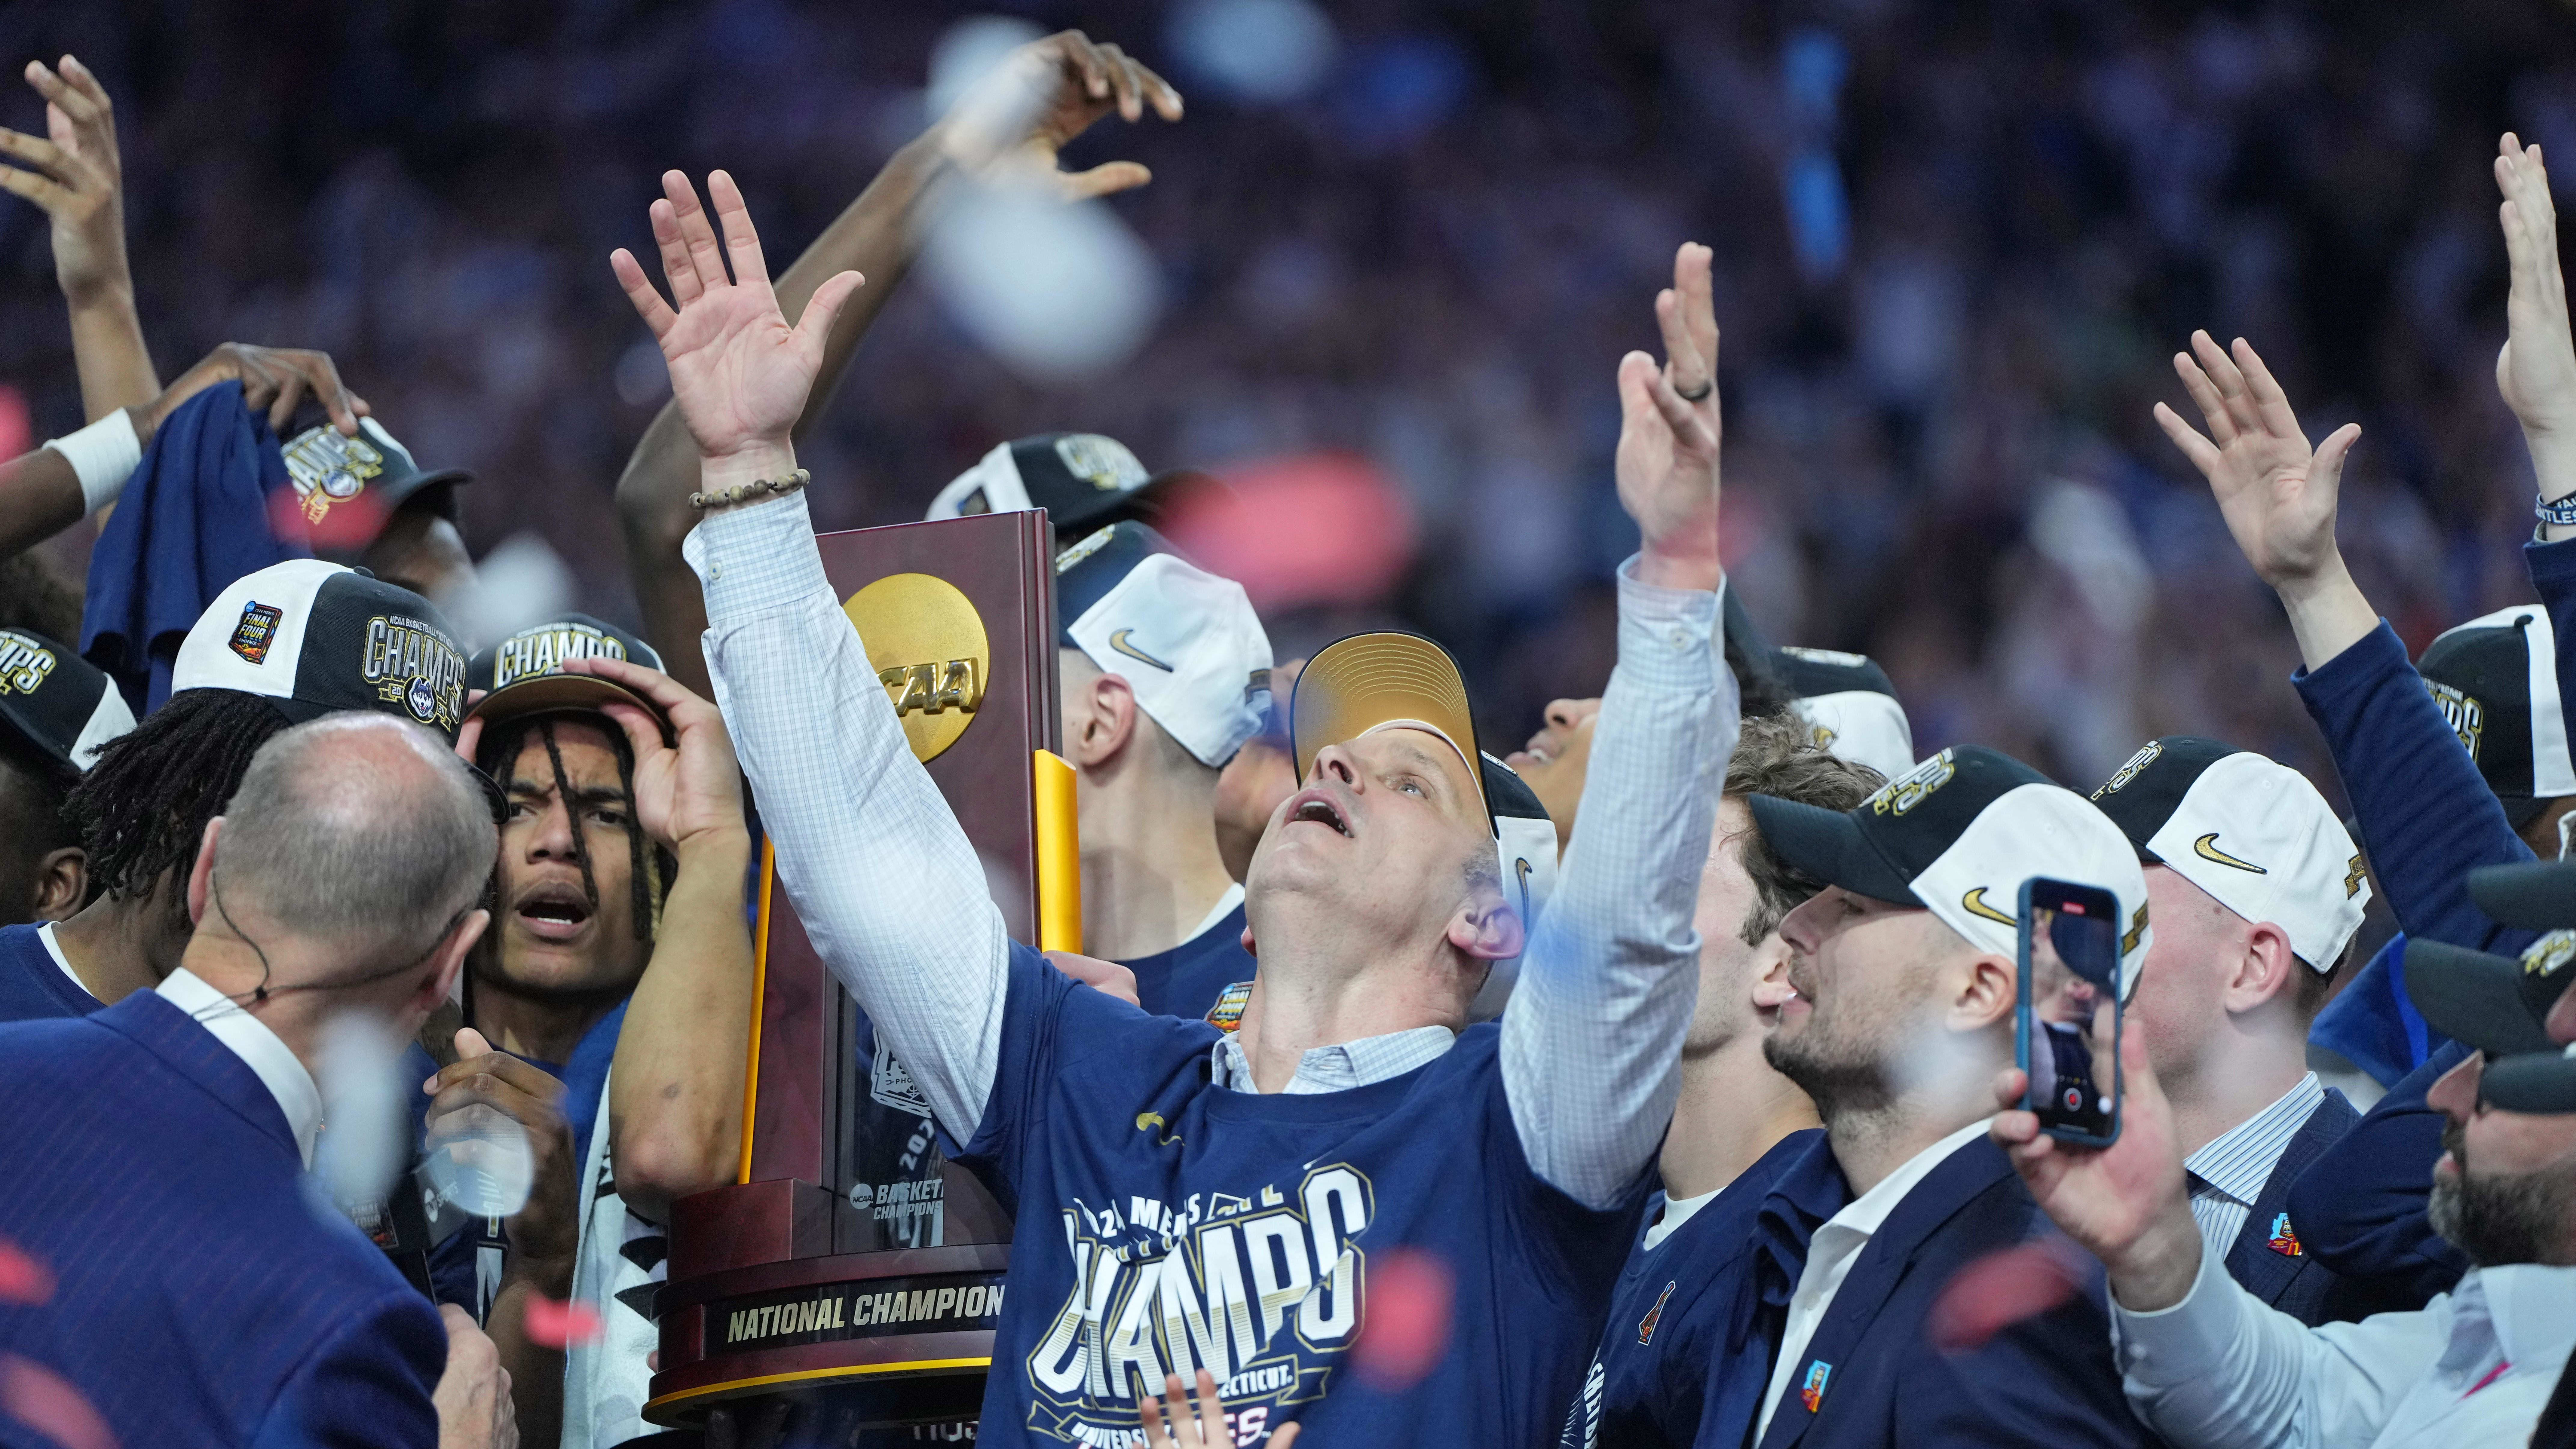 Hurley and the Huskies celebrate after winning the national championship.